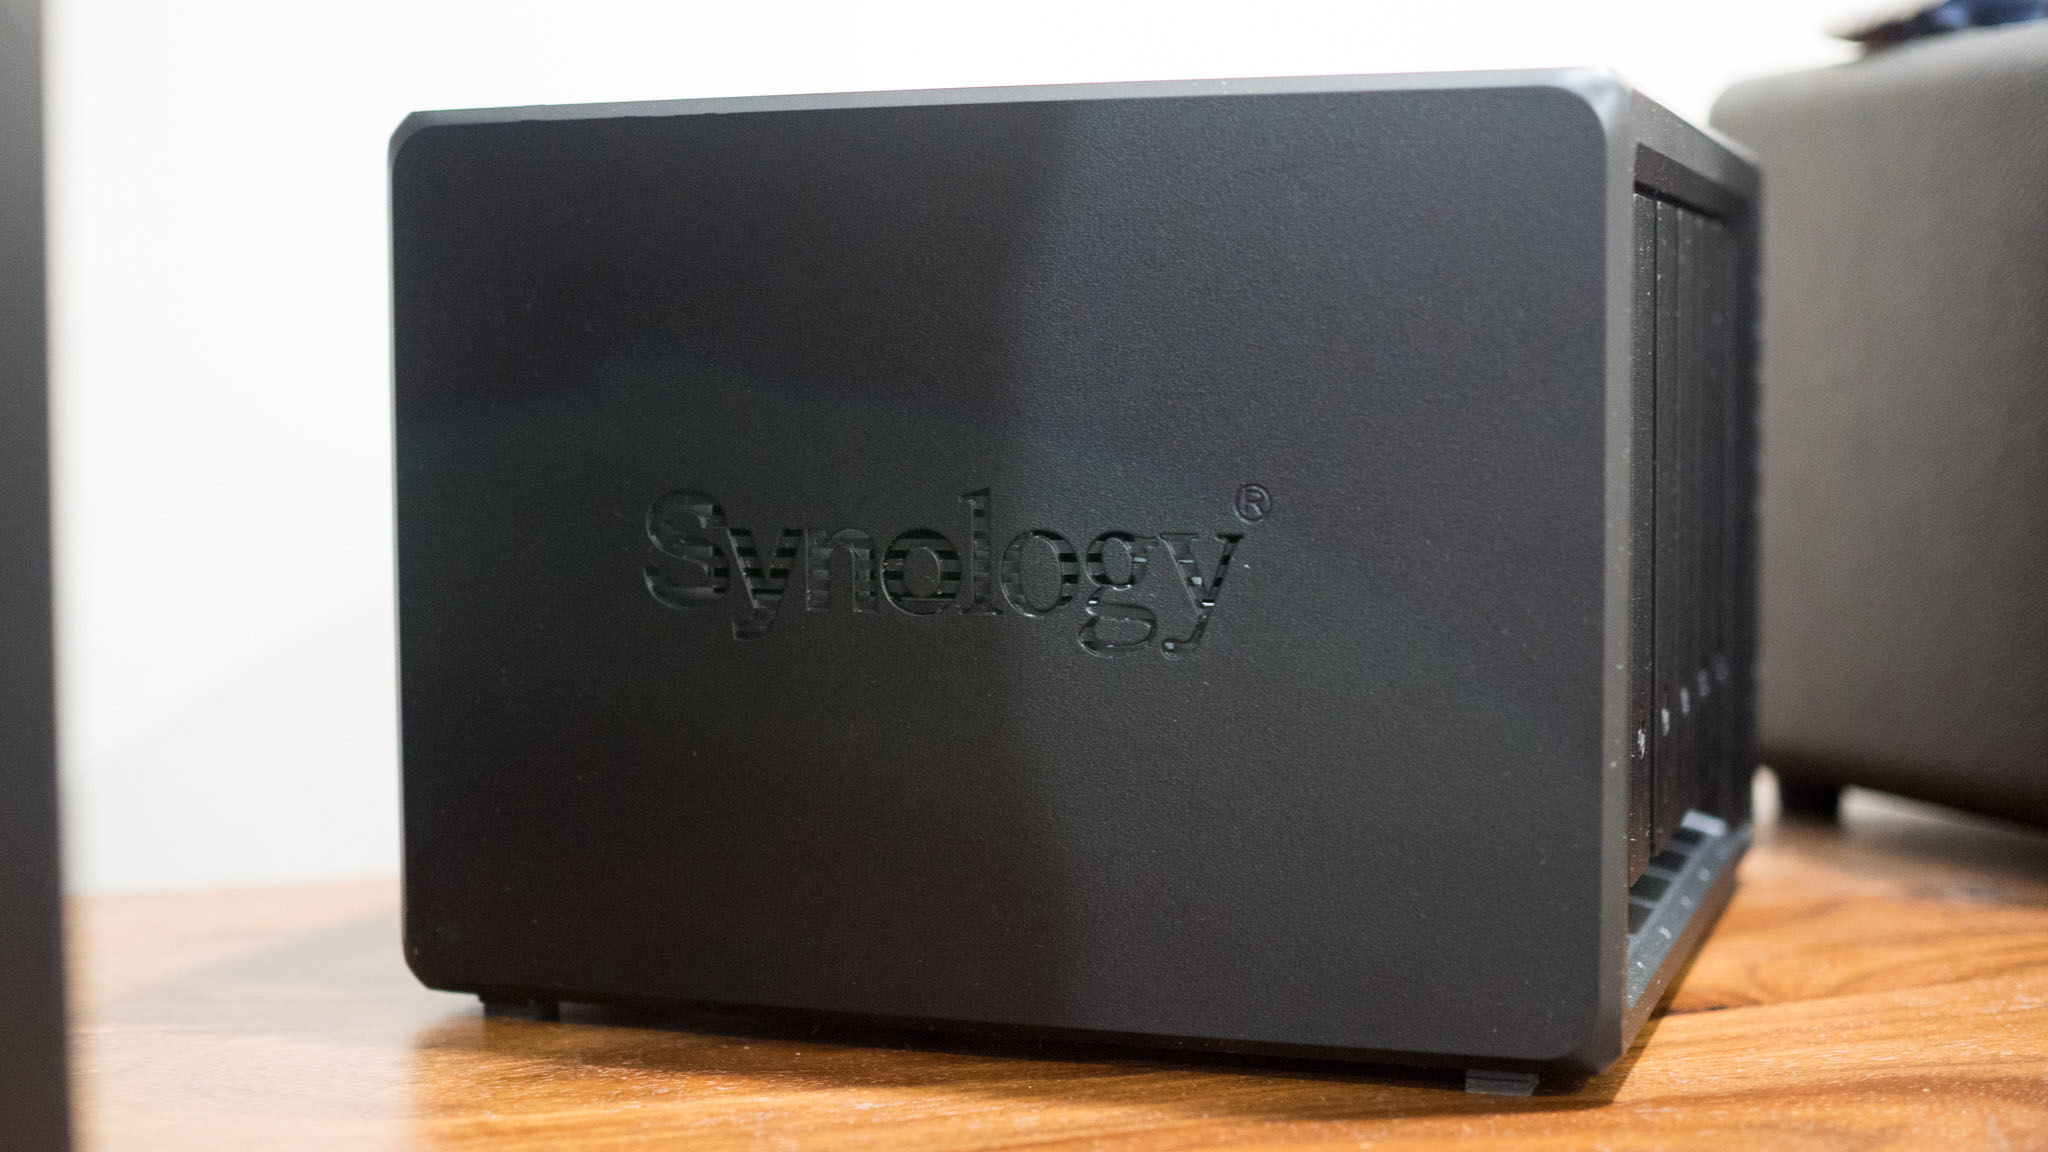 Synology DiskStation DS1520+ review